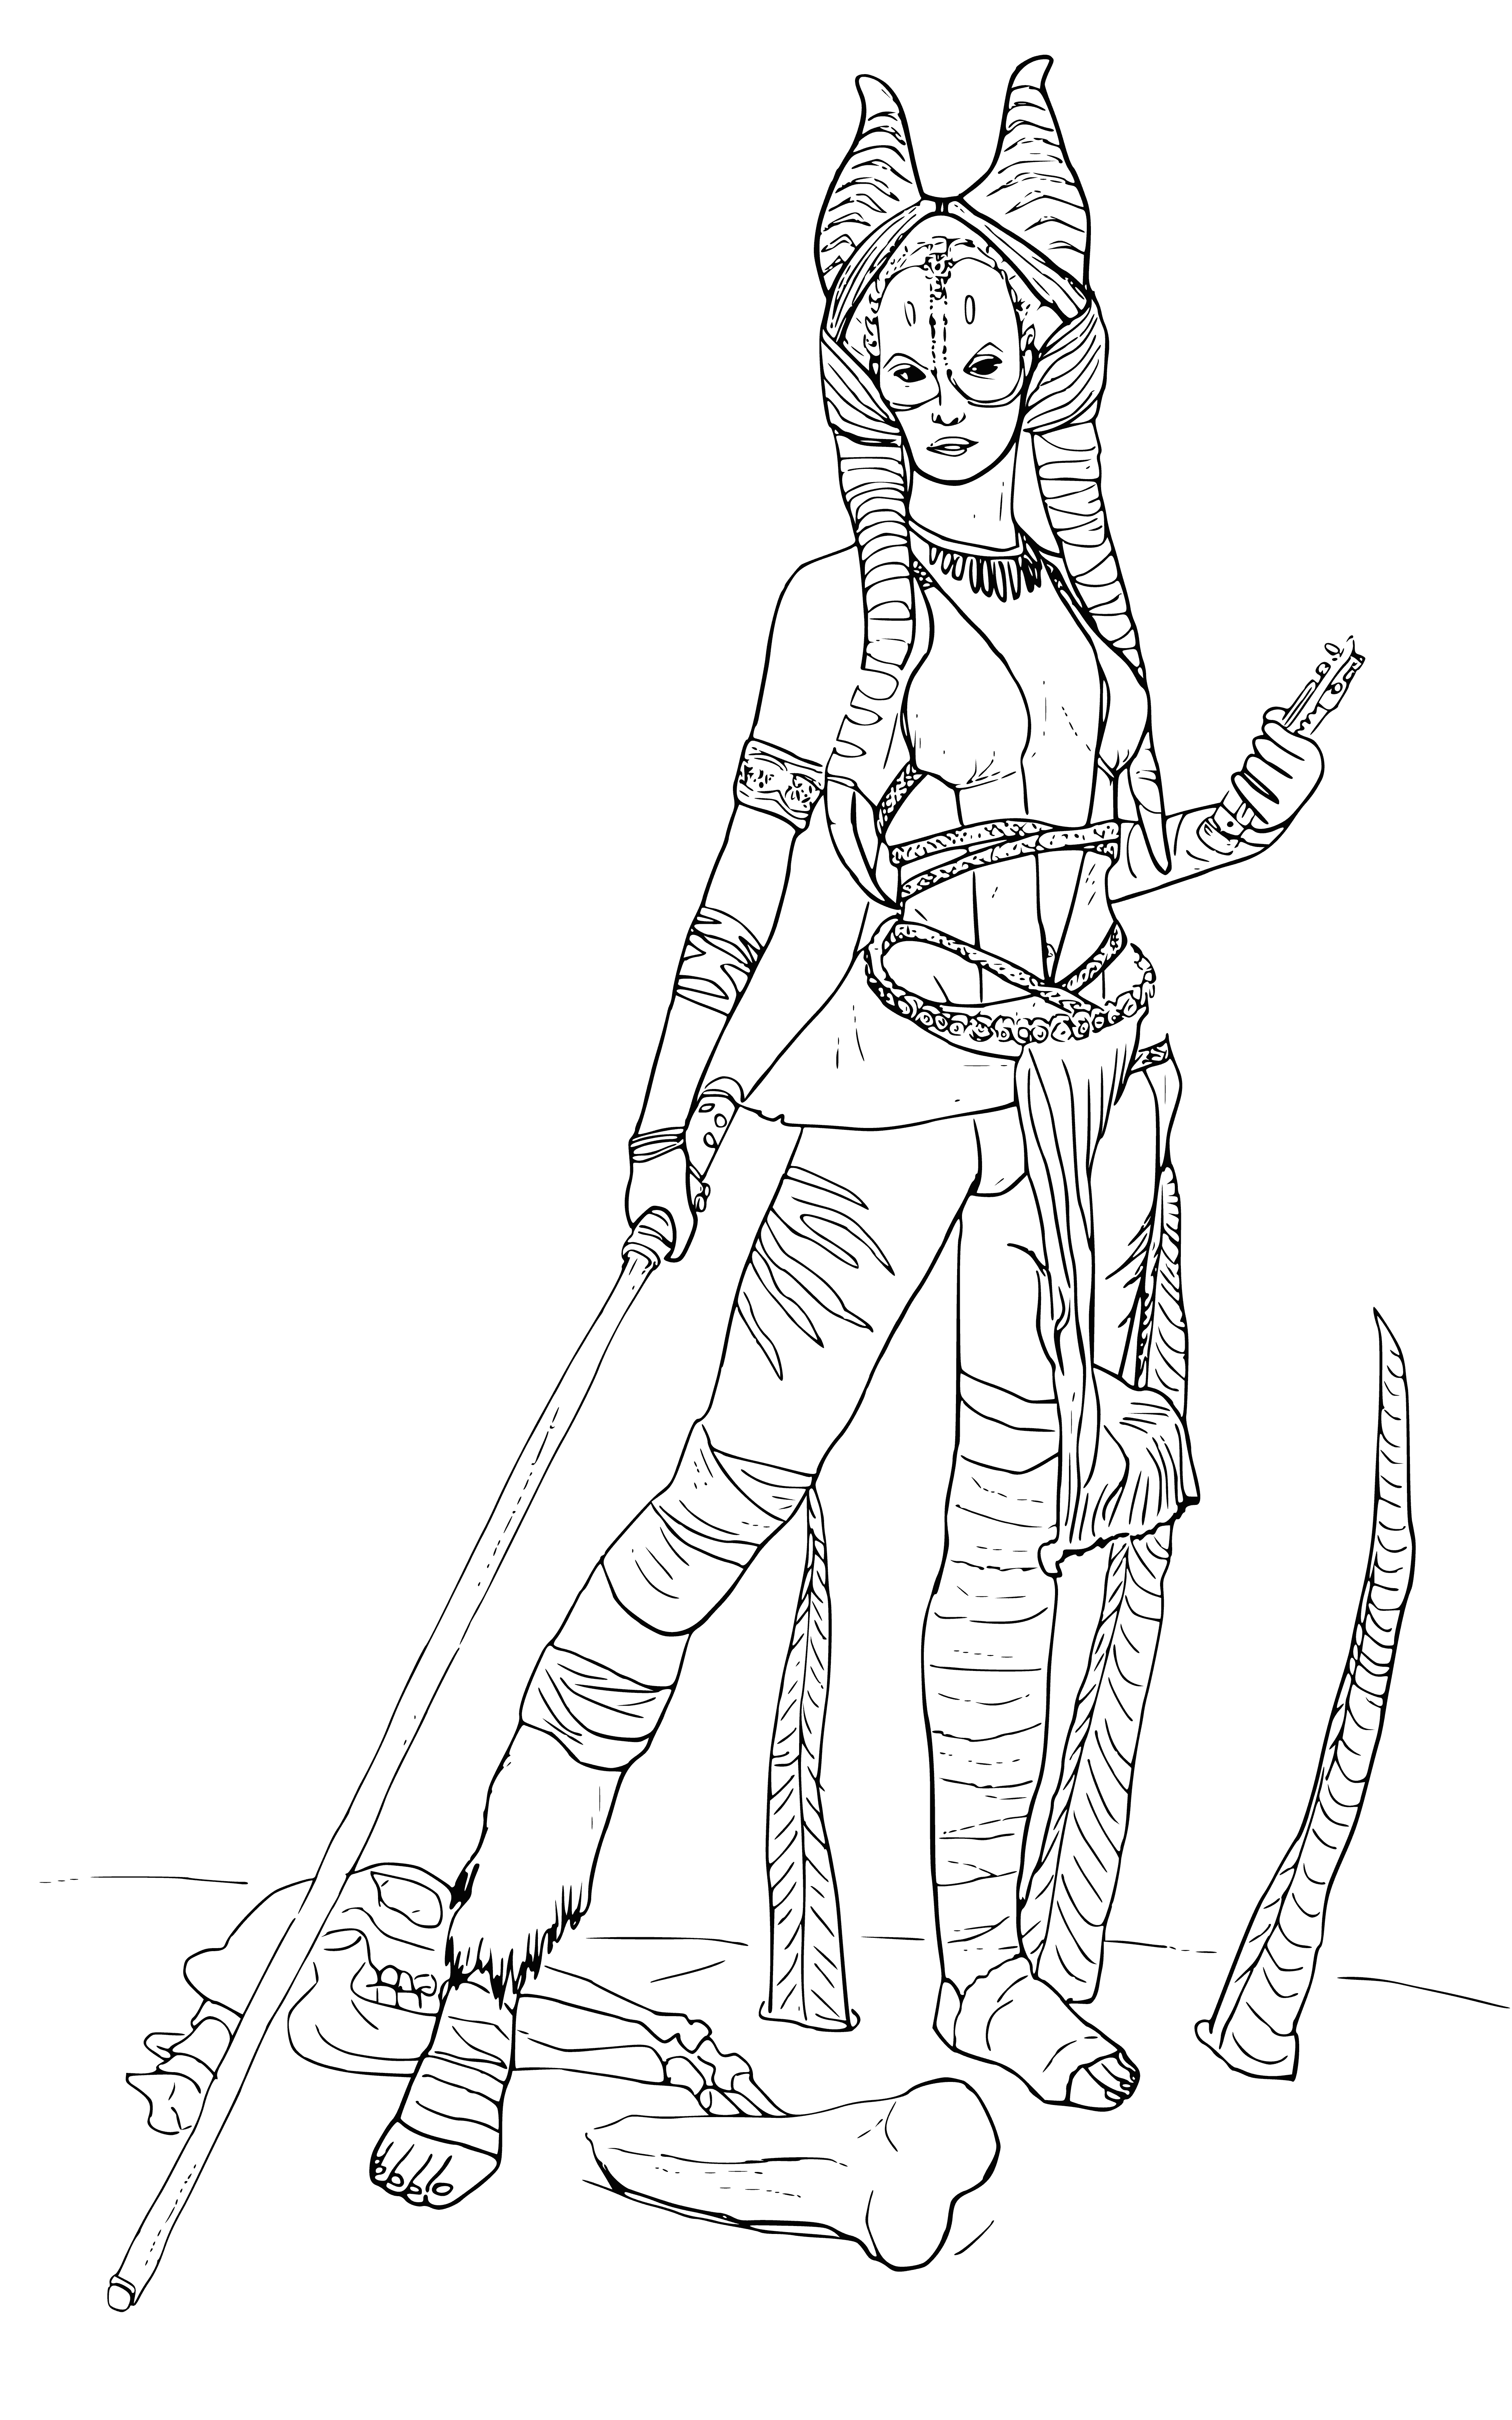 coloring page: #StarWars 

Woman Jedi in ready stance, armed with lightsaber. Preparing to fight forces of evil. #StarWars